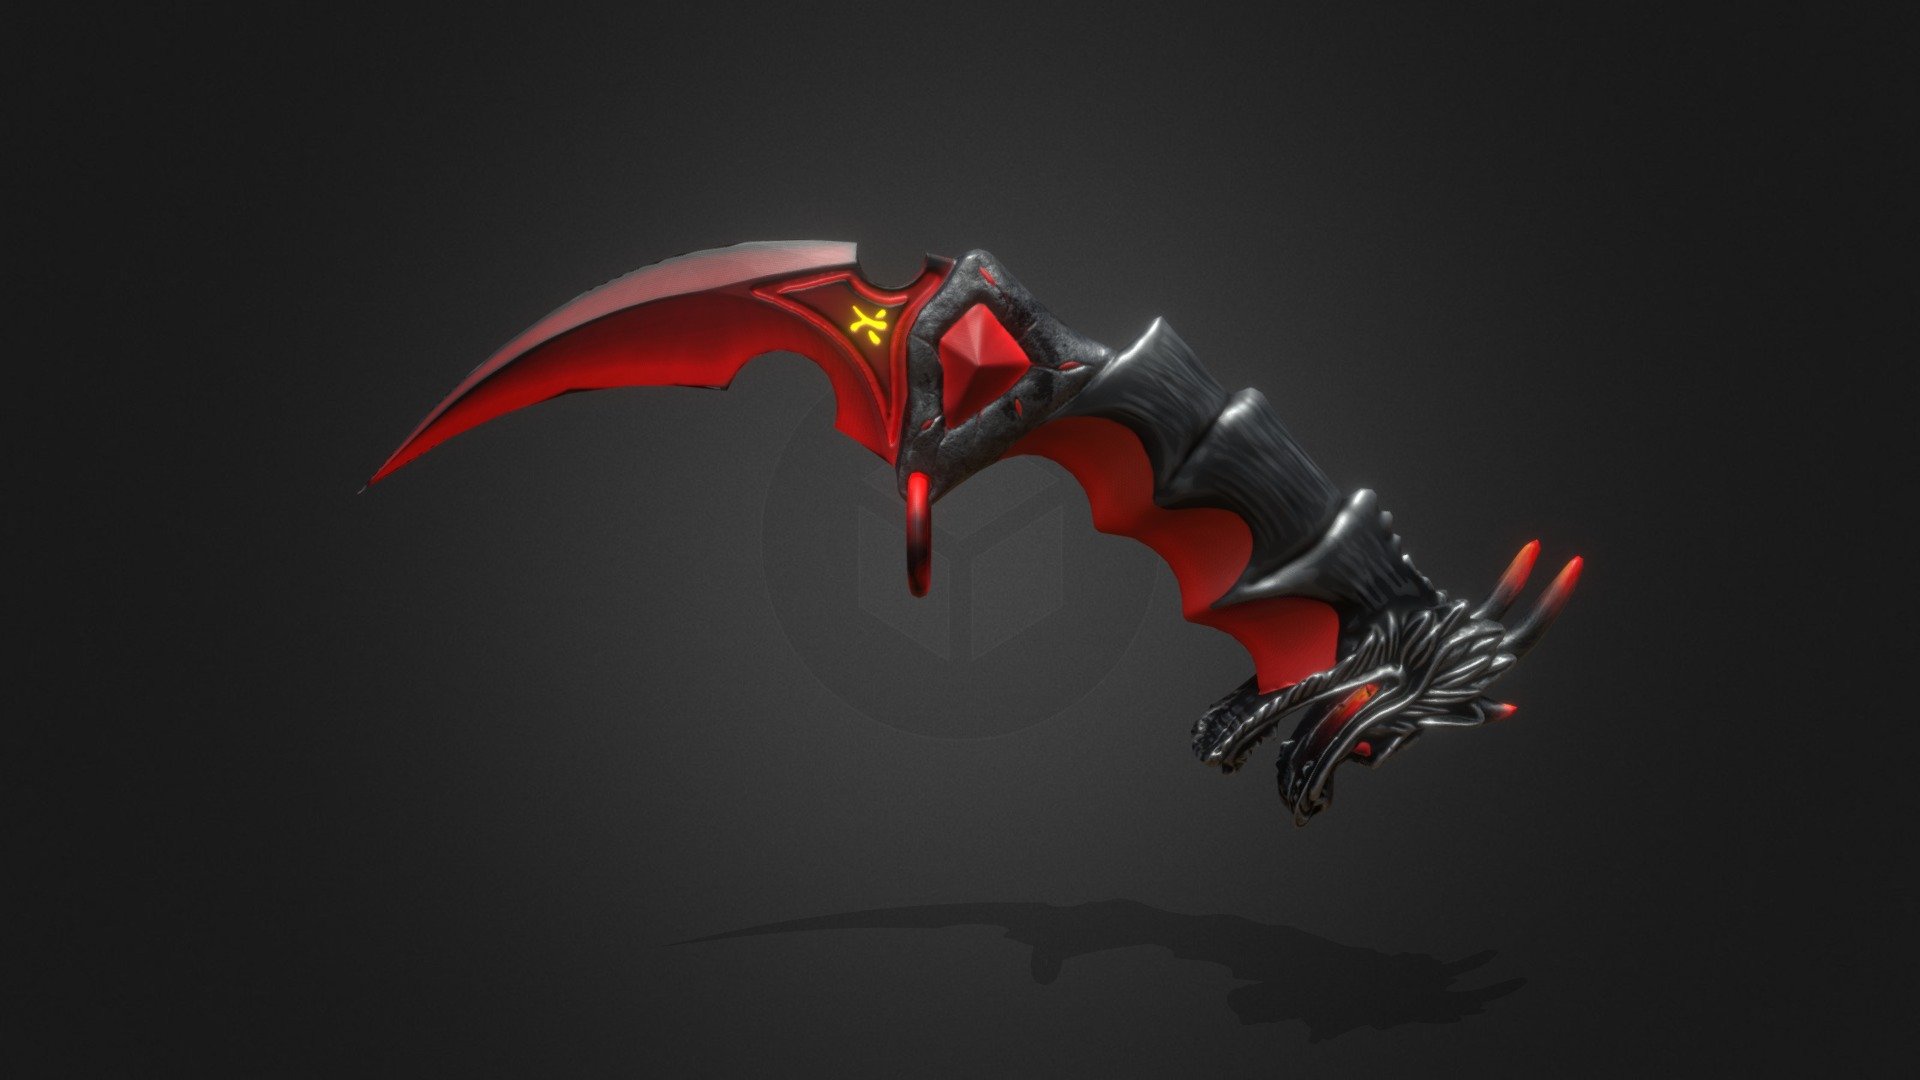 Hello, everyone. I'd like to share my dragon karambit model. Game ready project with optimize poly count 3d model